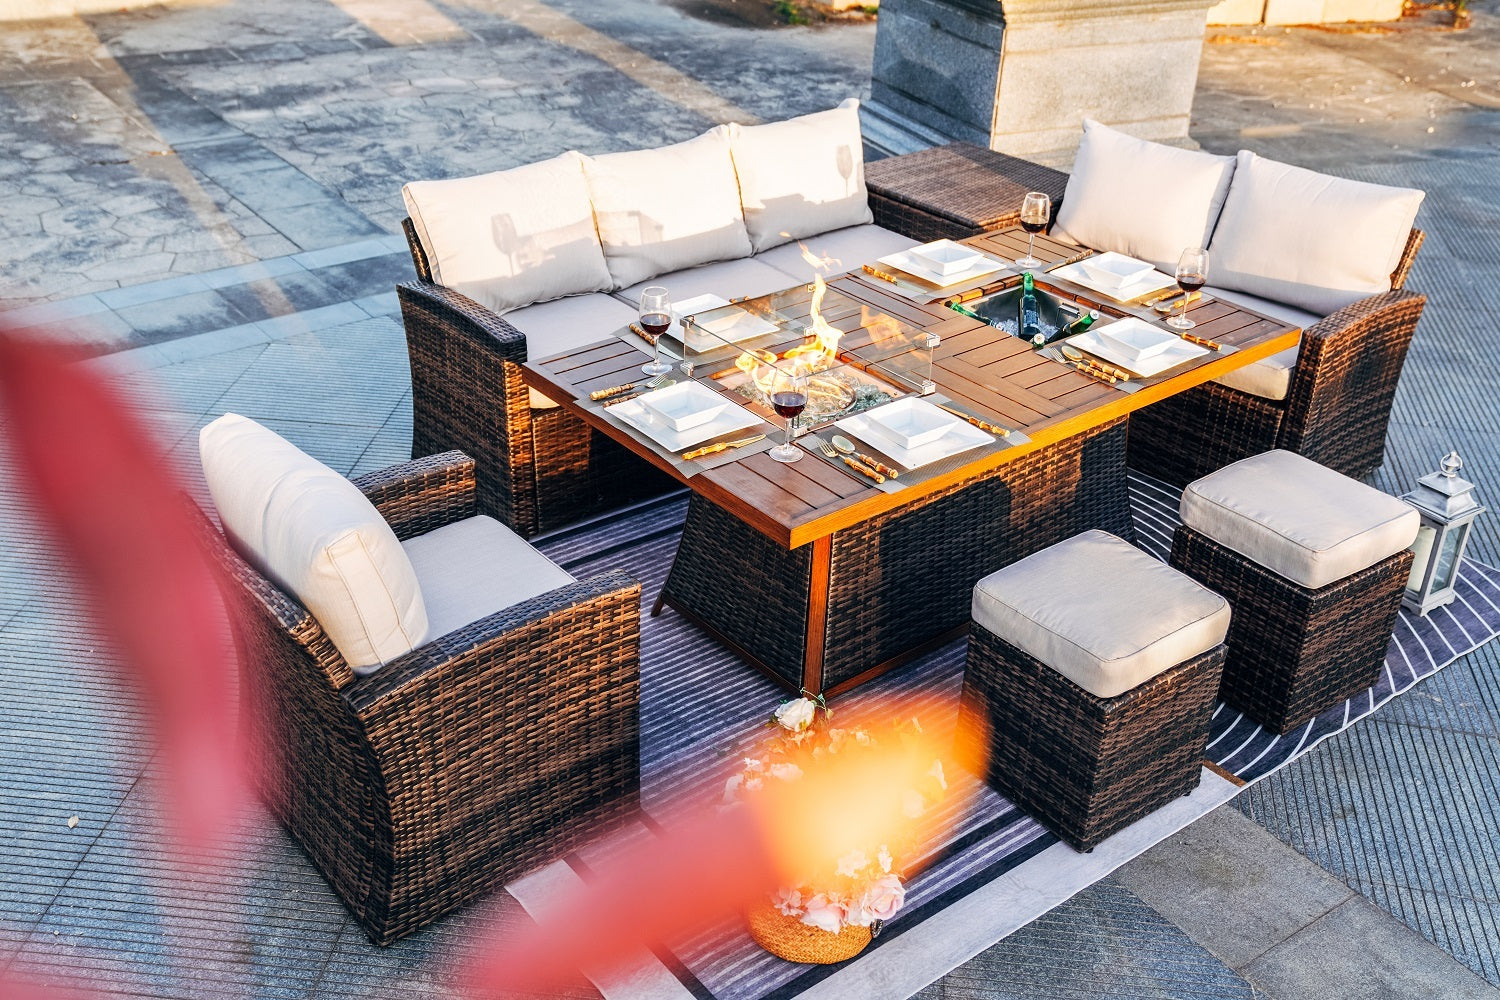 NEW 7-Piece Patio Brown Conversational Sofa Set With 1 Gas Firepit And Ice Container Rectangle Dining Table. 1 Storage Box And 2 Ottomans